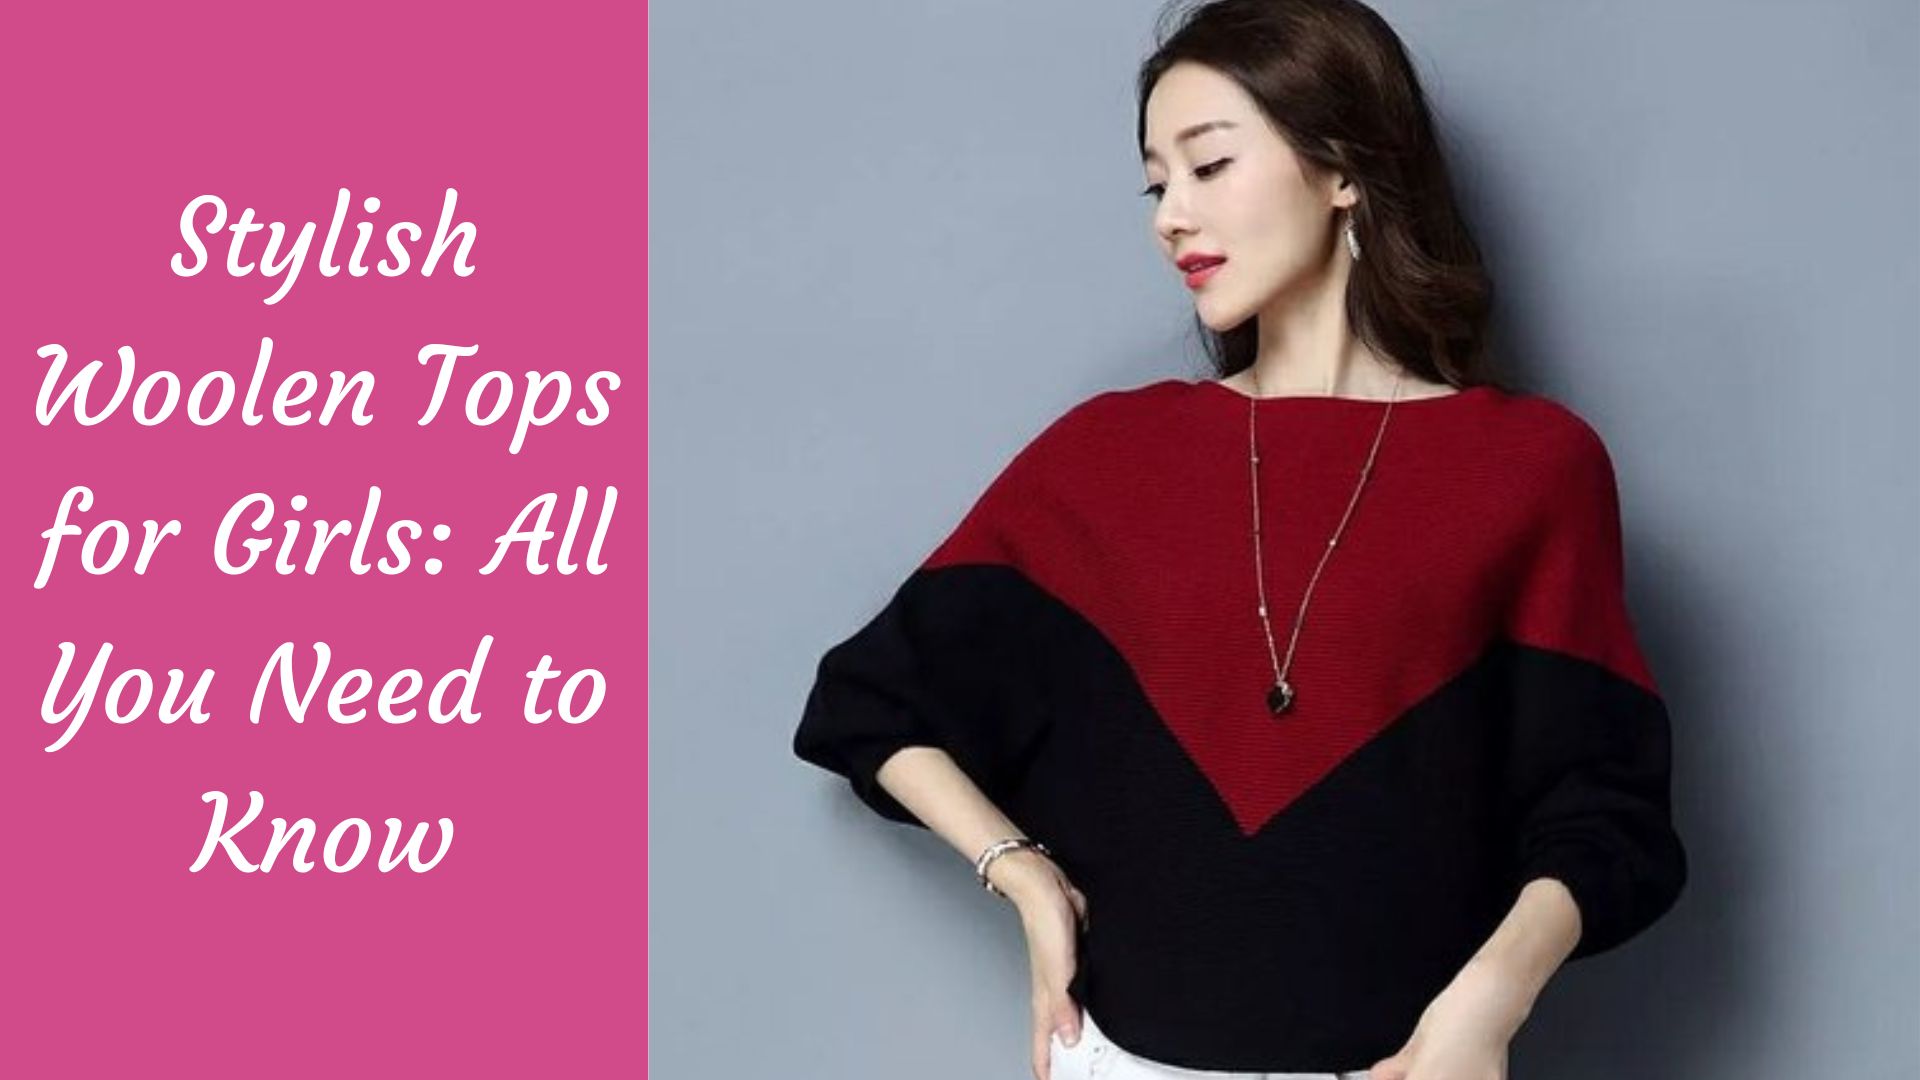 Stylish Woolen Tops for Girls: All You Need to Know - The Kosha